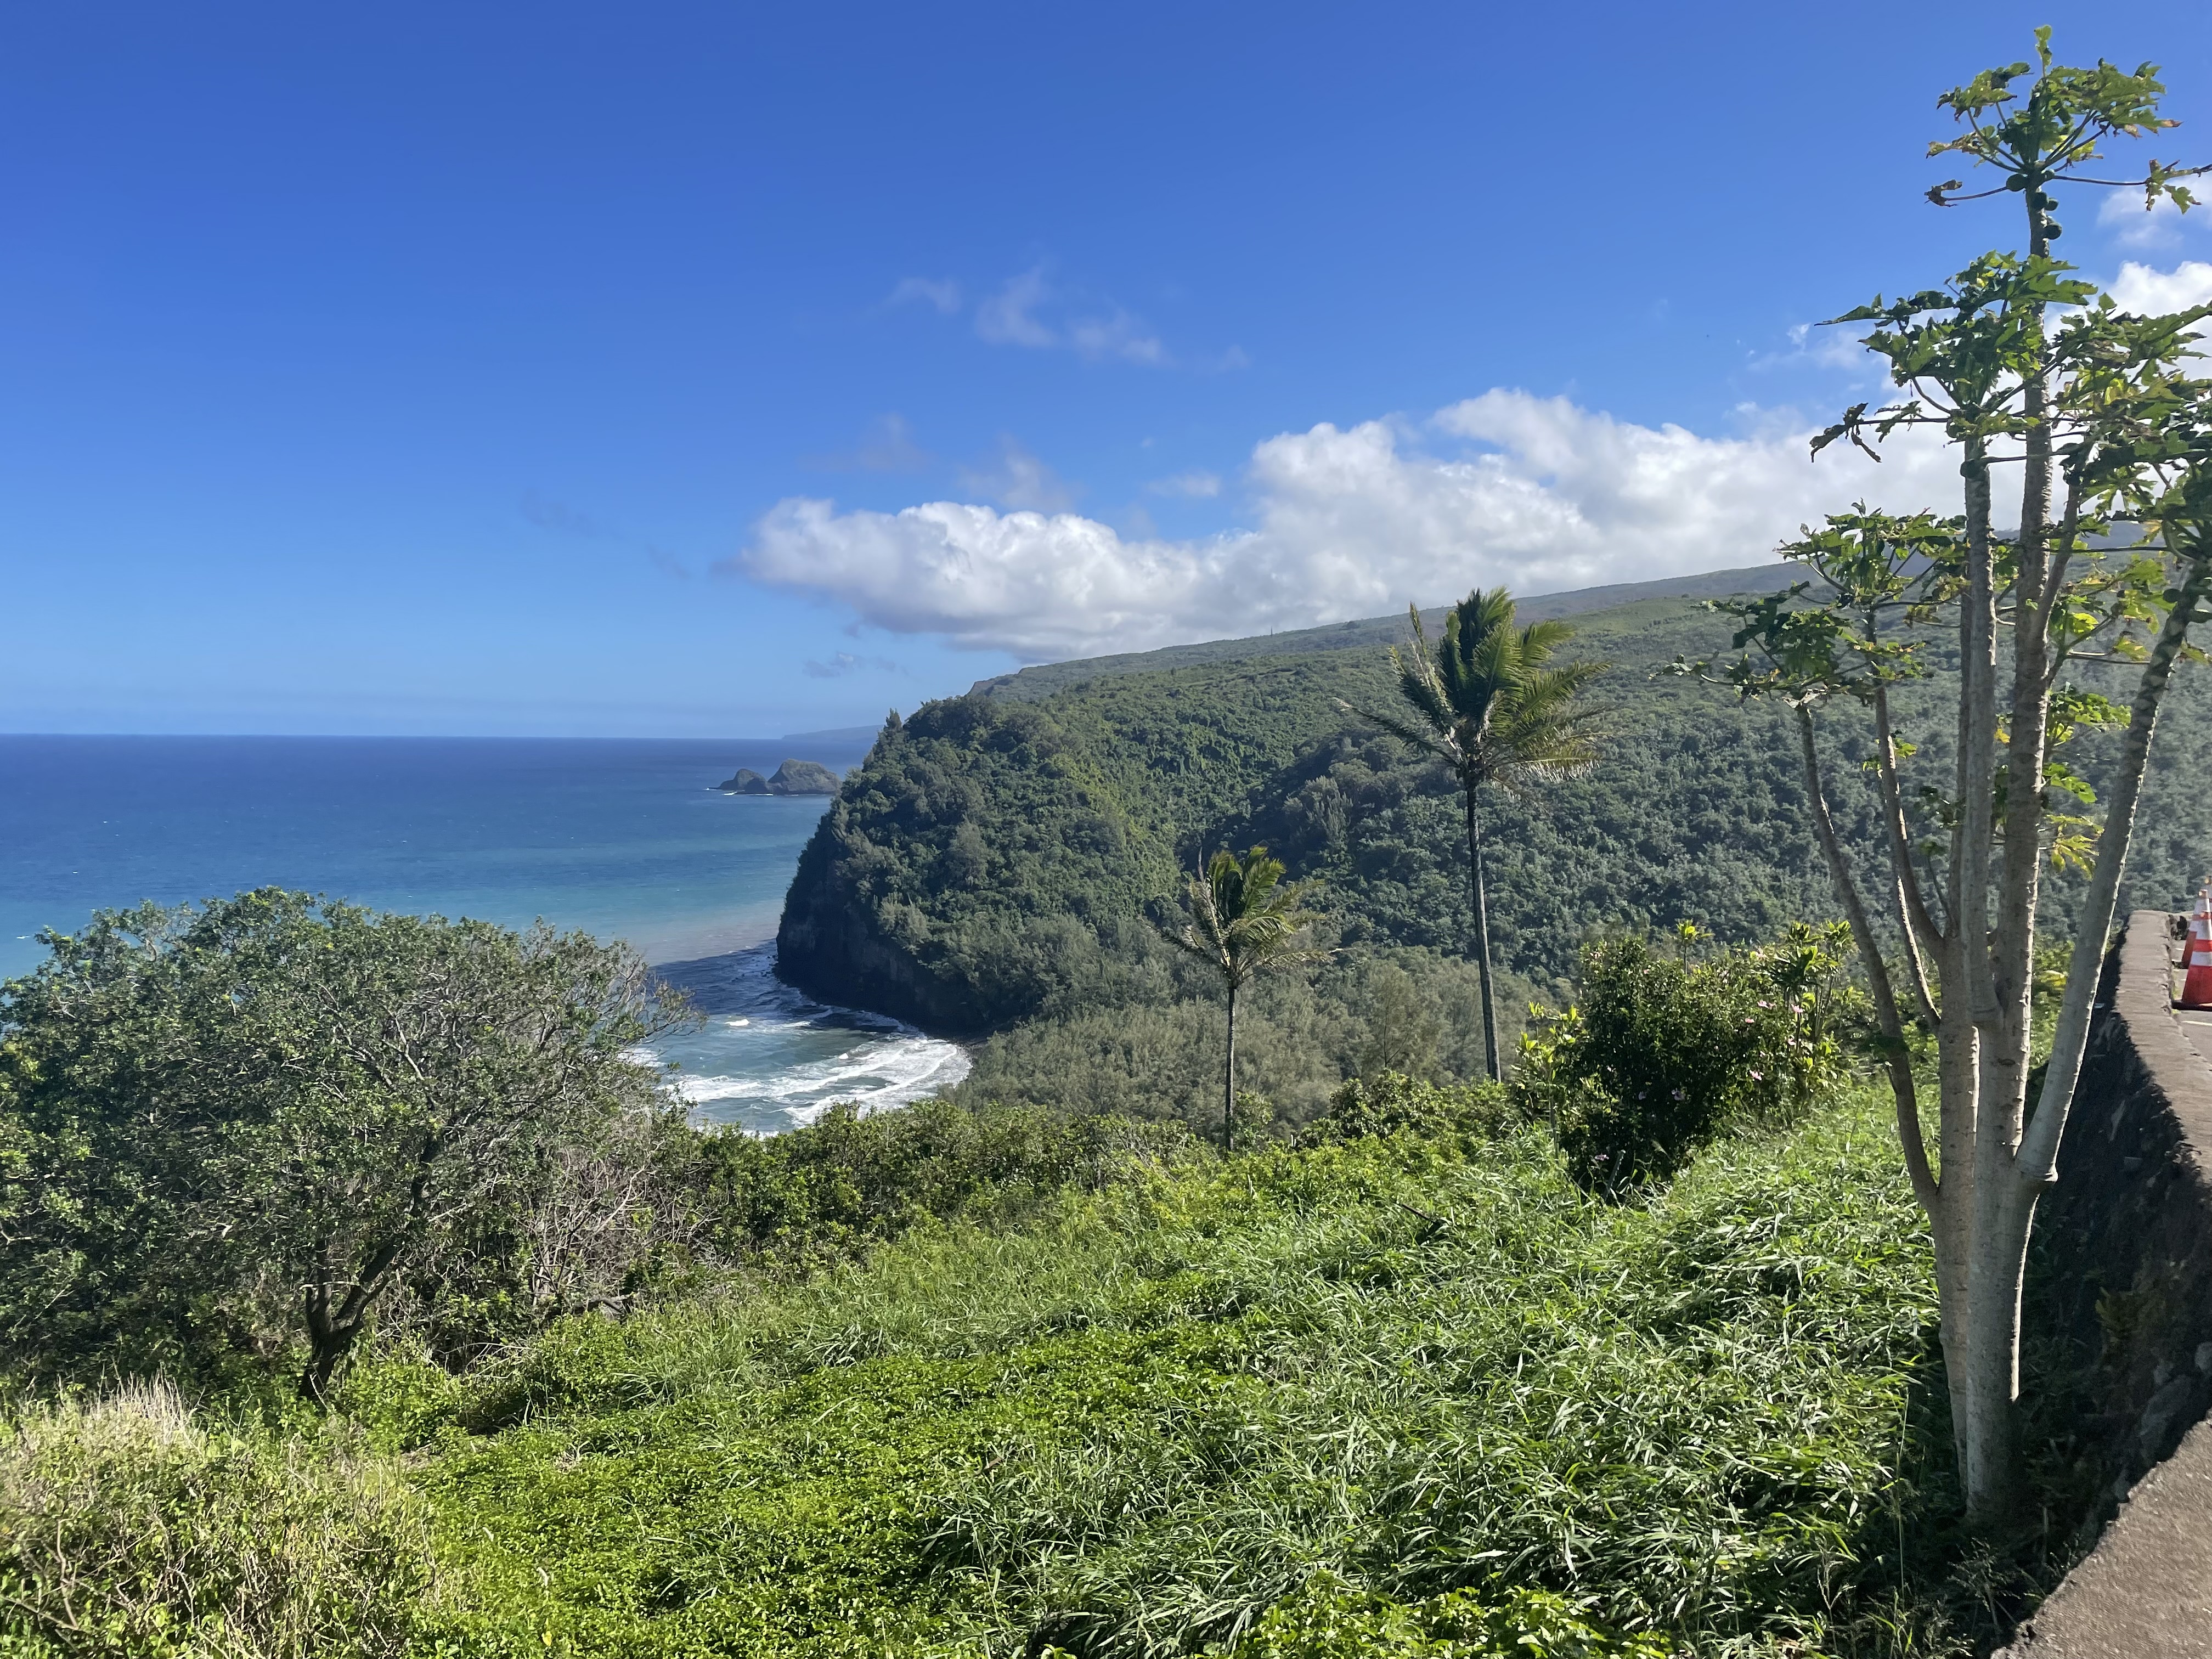 Start of the hike at Pololu Valley